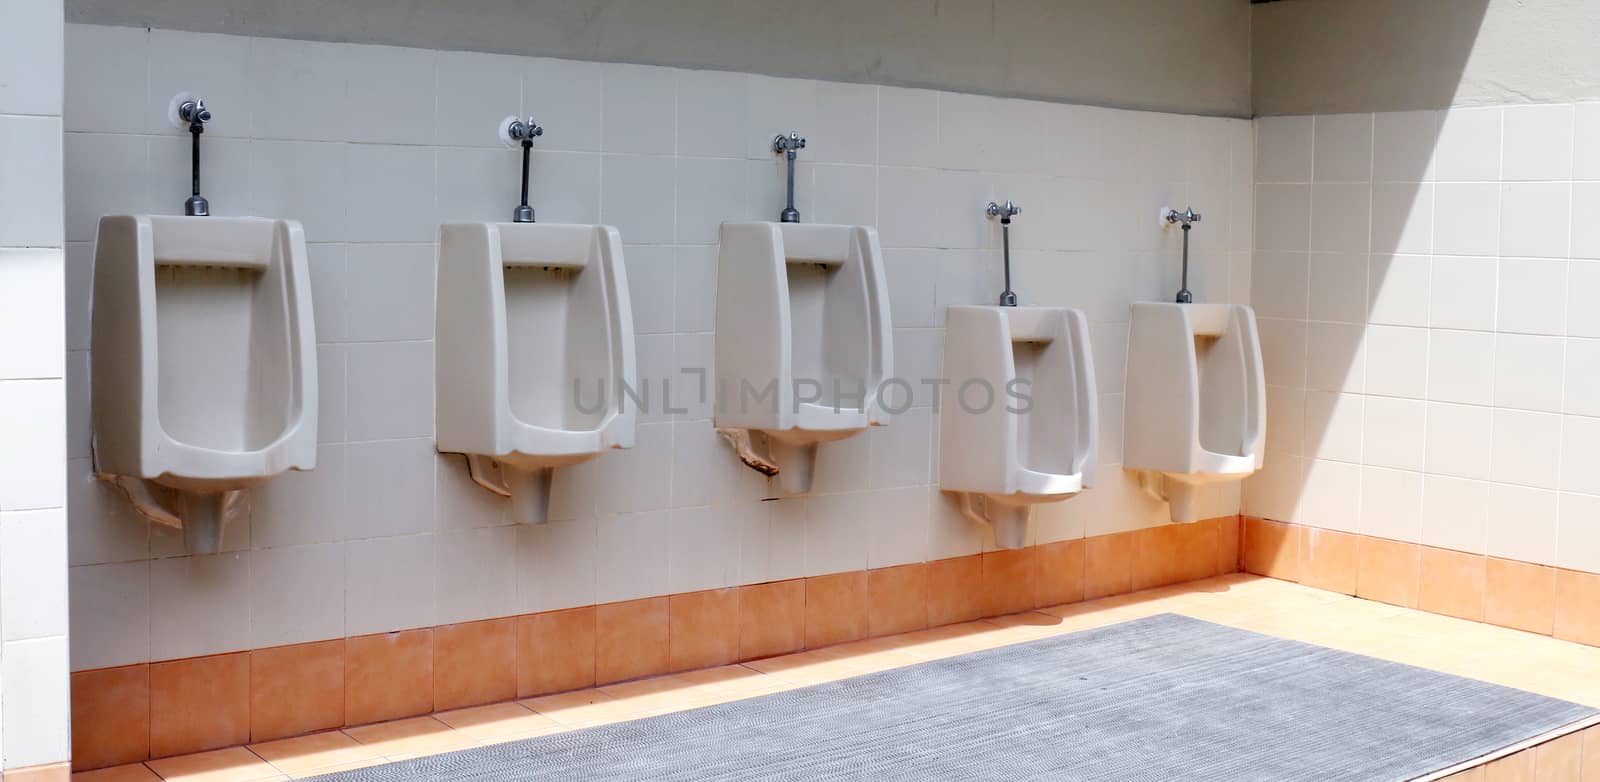 outdoor toilet old color orange, the toilet of man with toilet view by urinals by cgdeaw